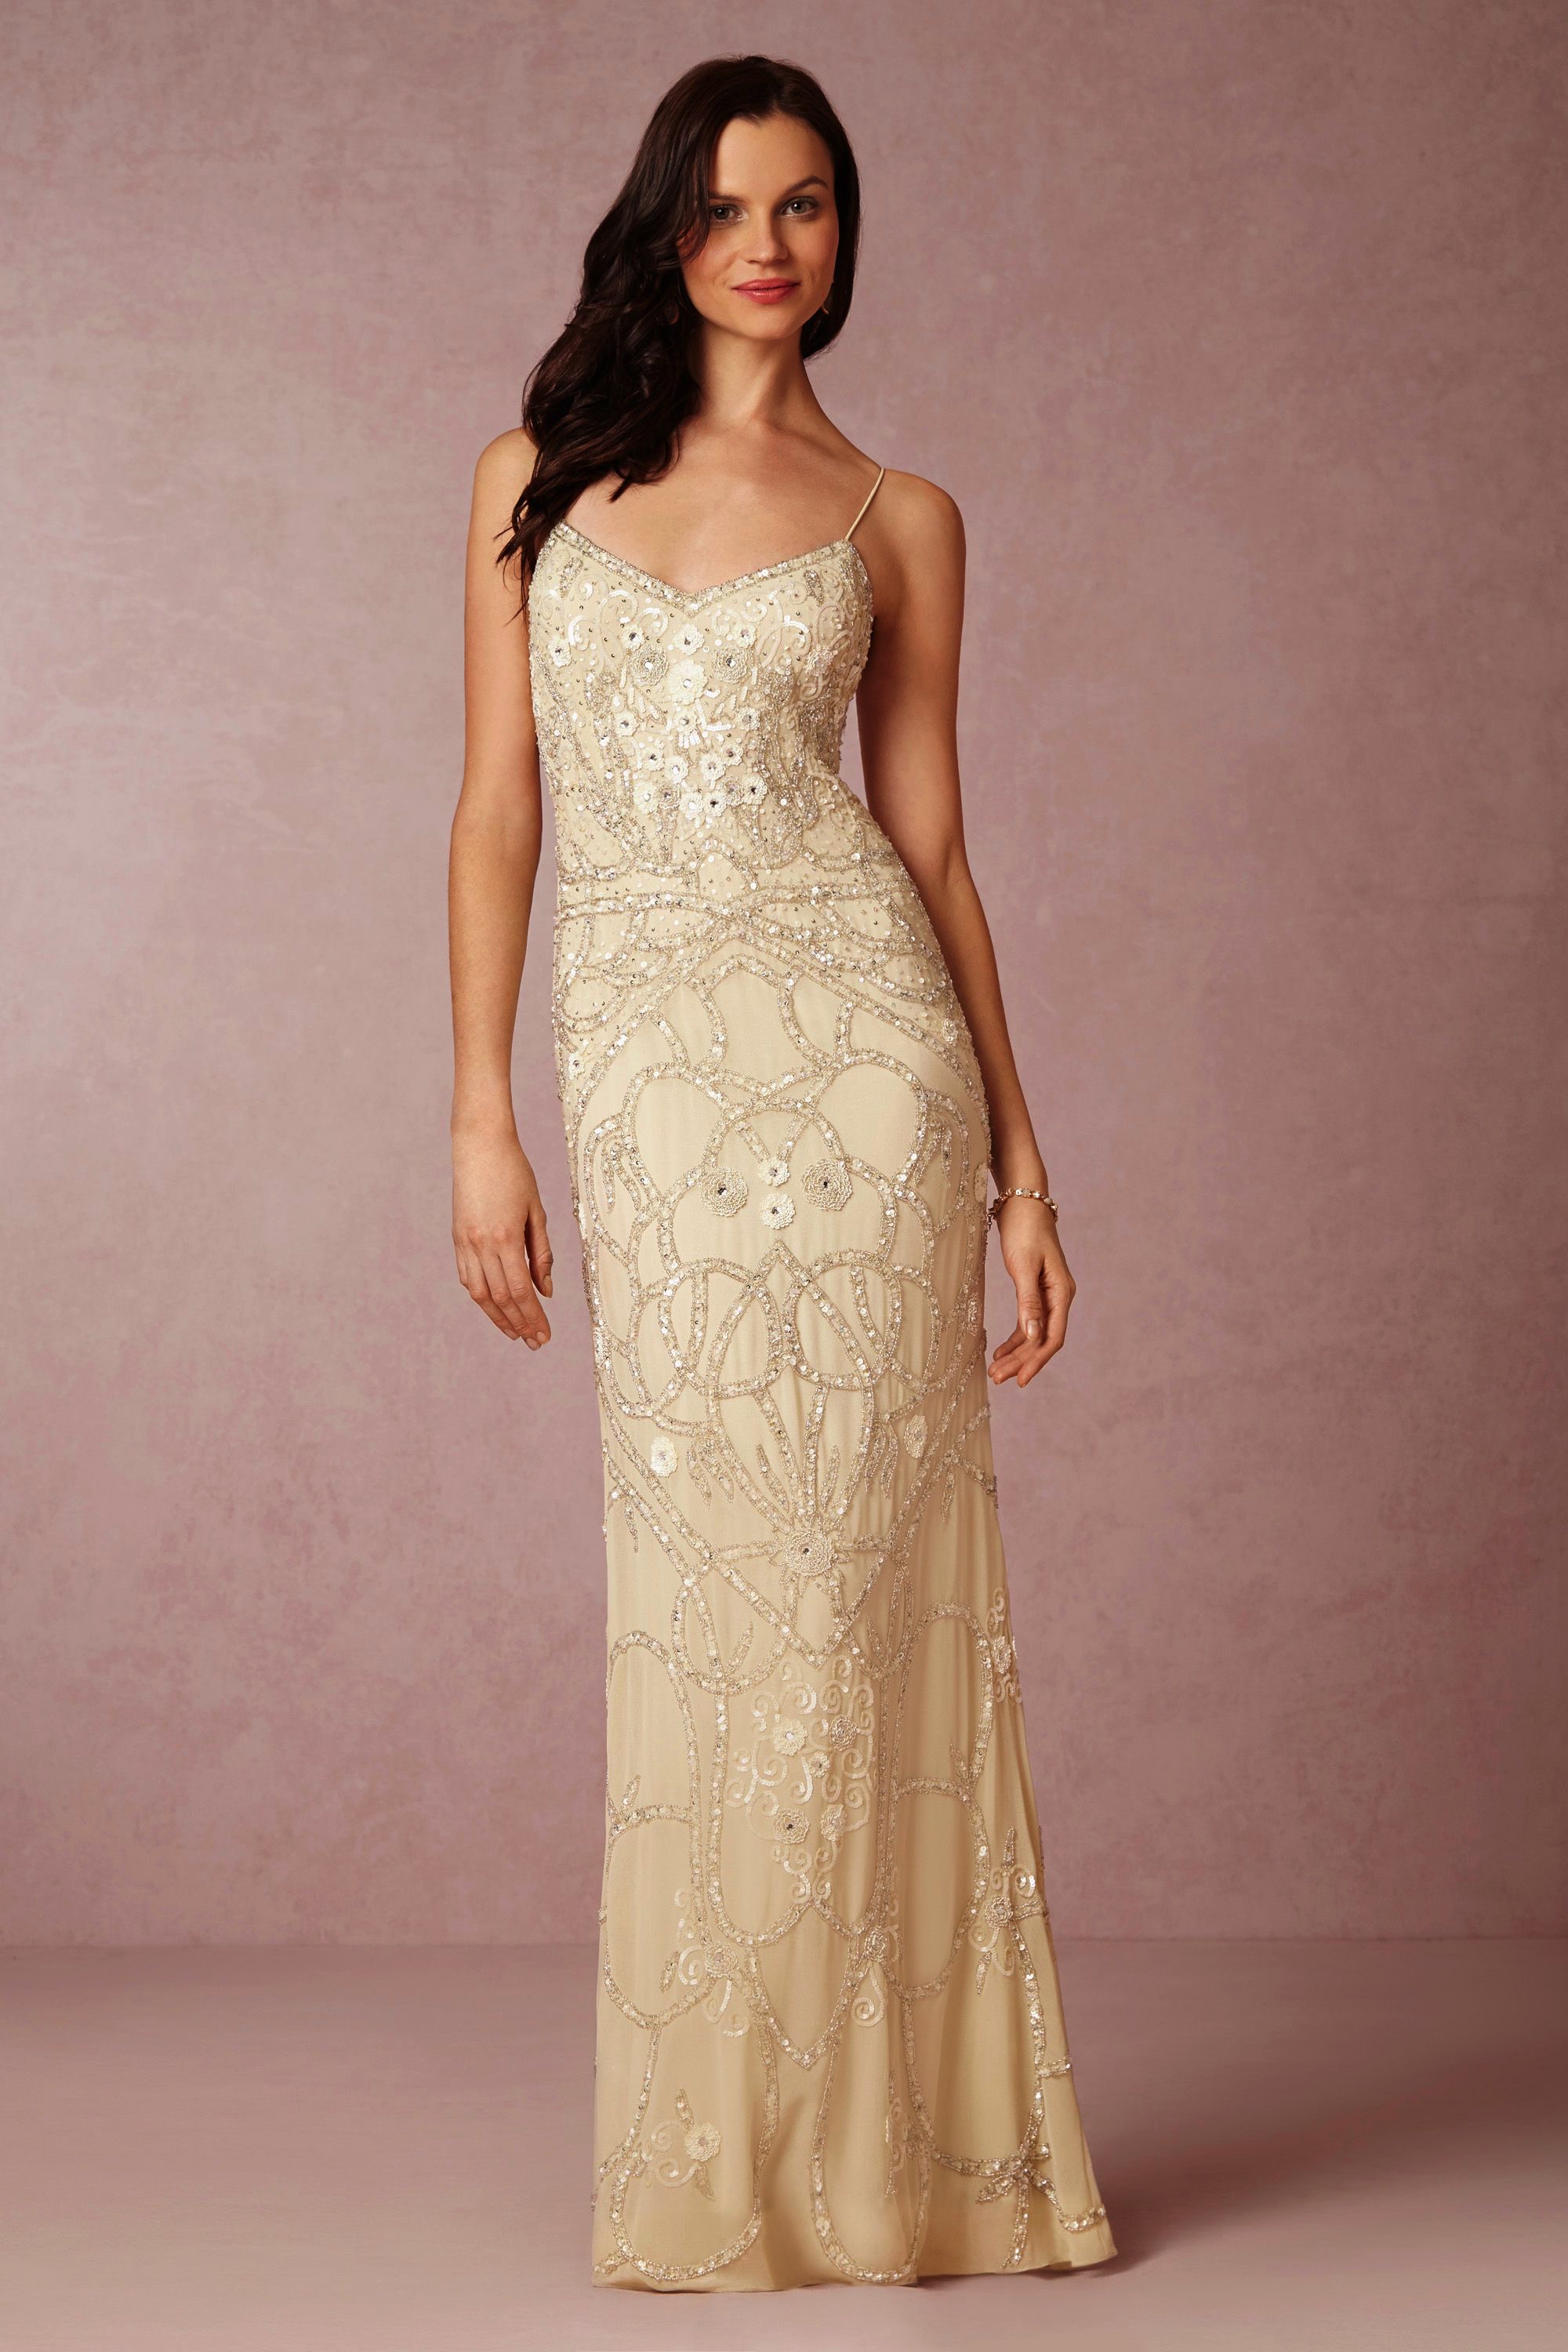 Aria Gown by BHLDN